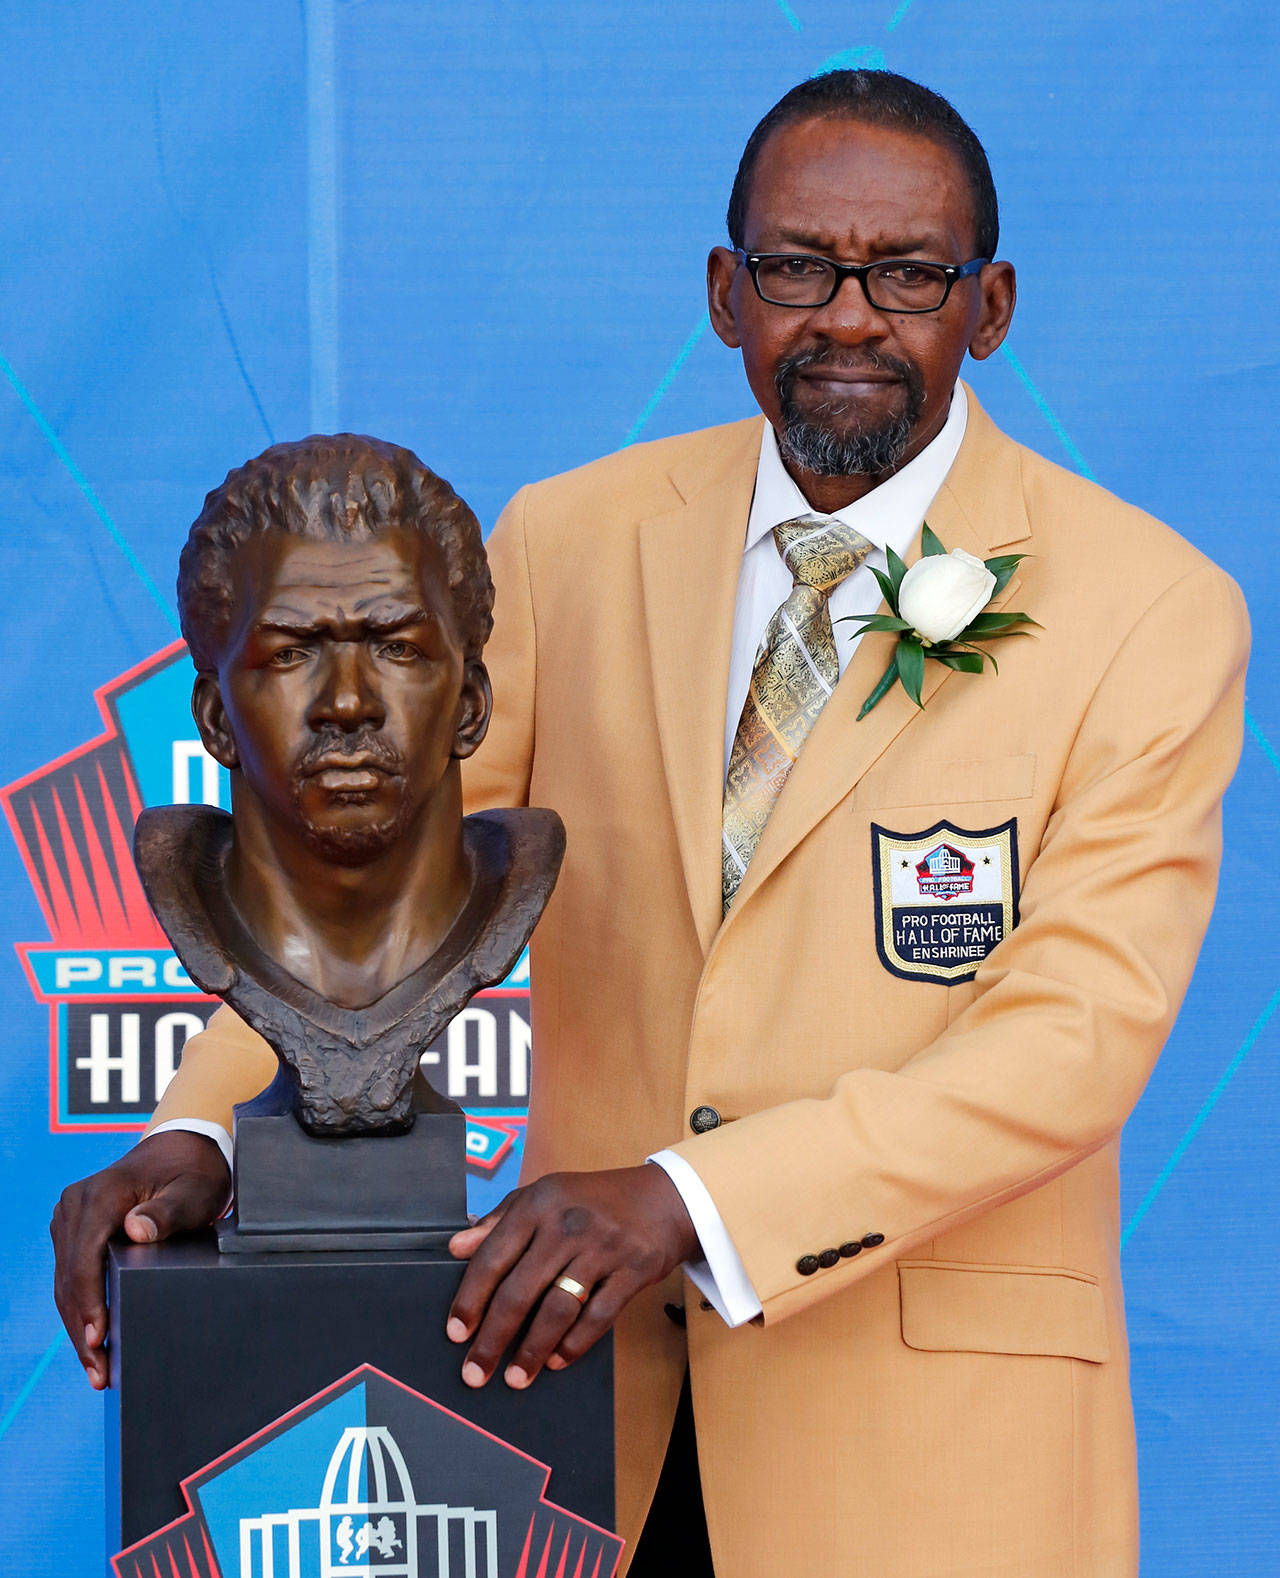 Former Seattle Seahawks player Kenny Easley poses with a bust of himself during an induction ceremony at the Pro Football Hall of Fame on Saturday in Canton, Ohio. (AP Photo/Ron Schwane)